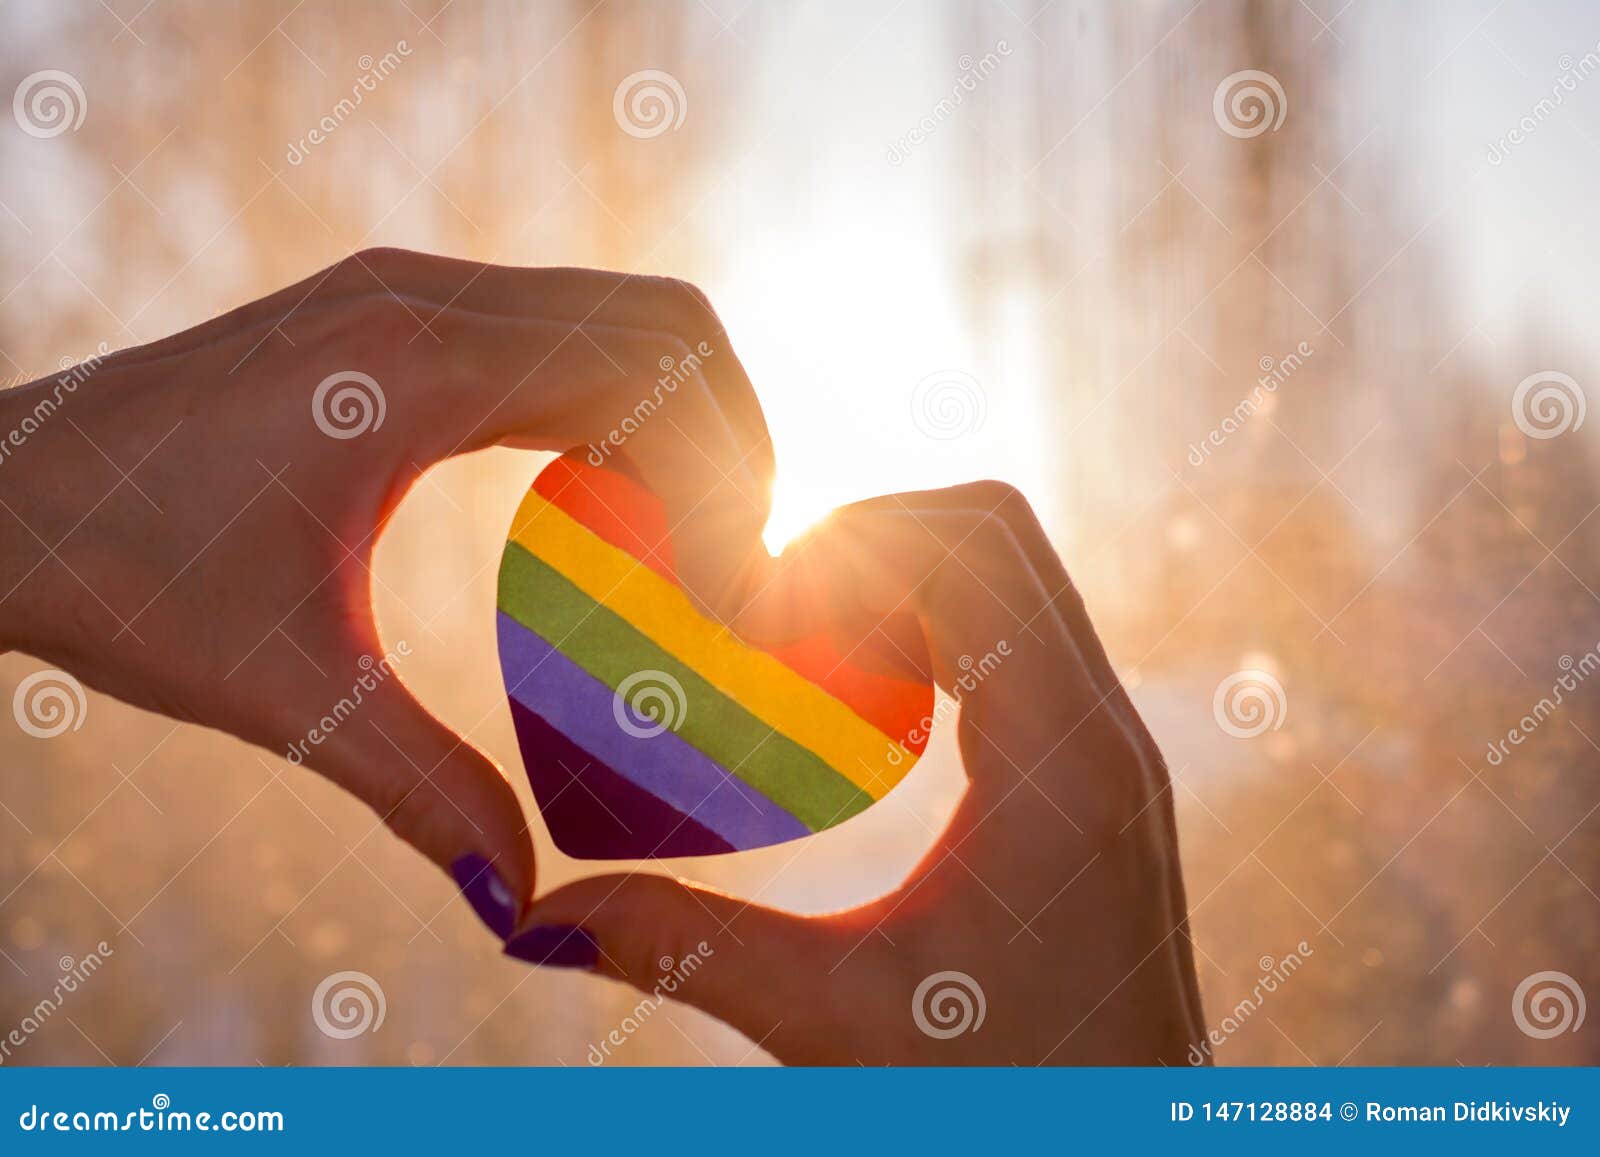 hands in the form of heart holds a heart painted like a lgbt flag